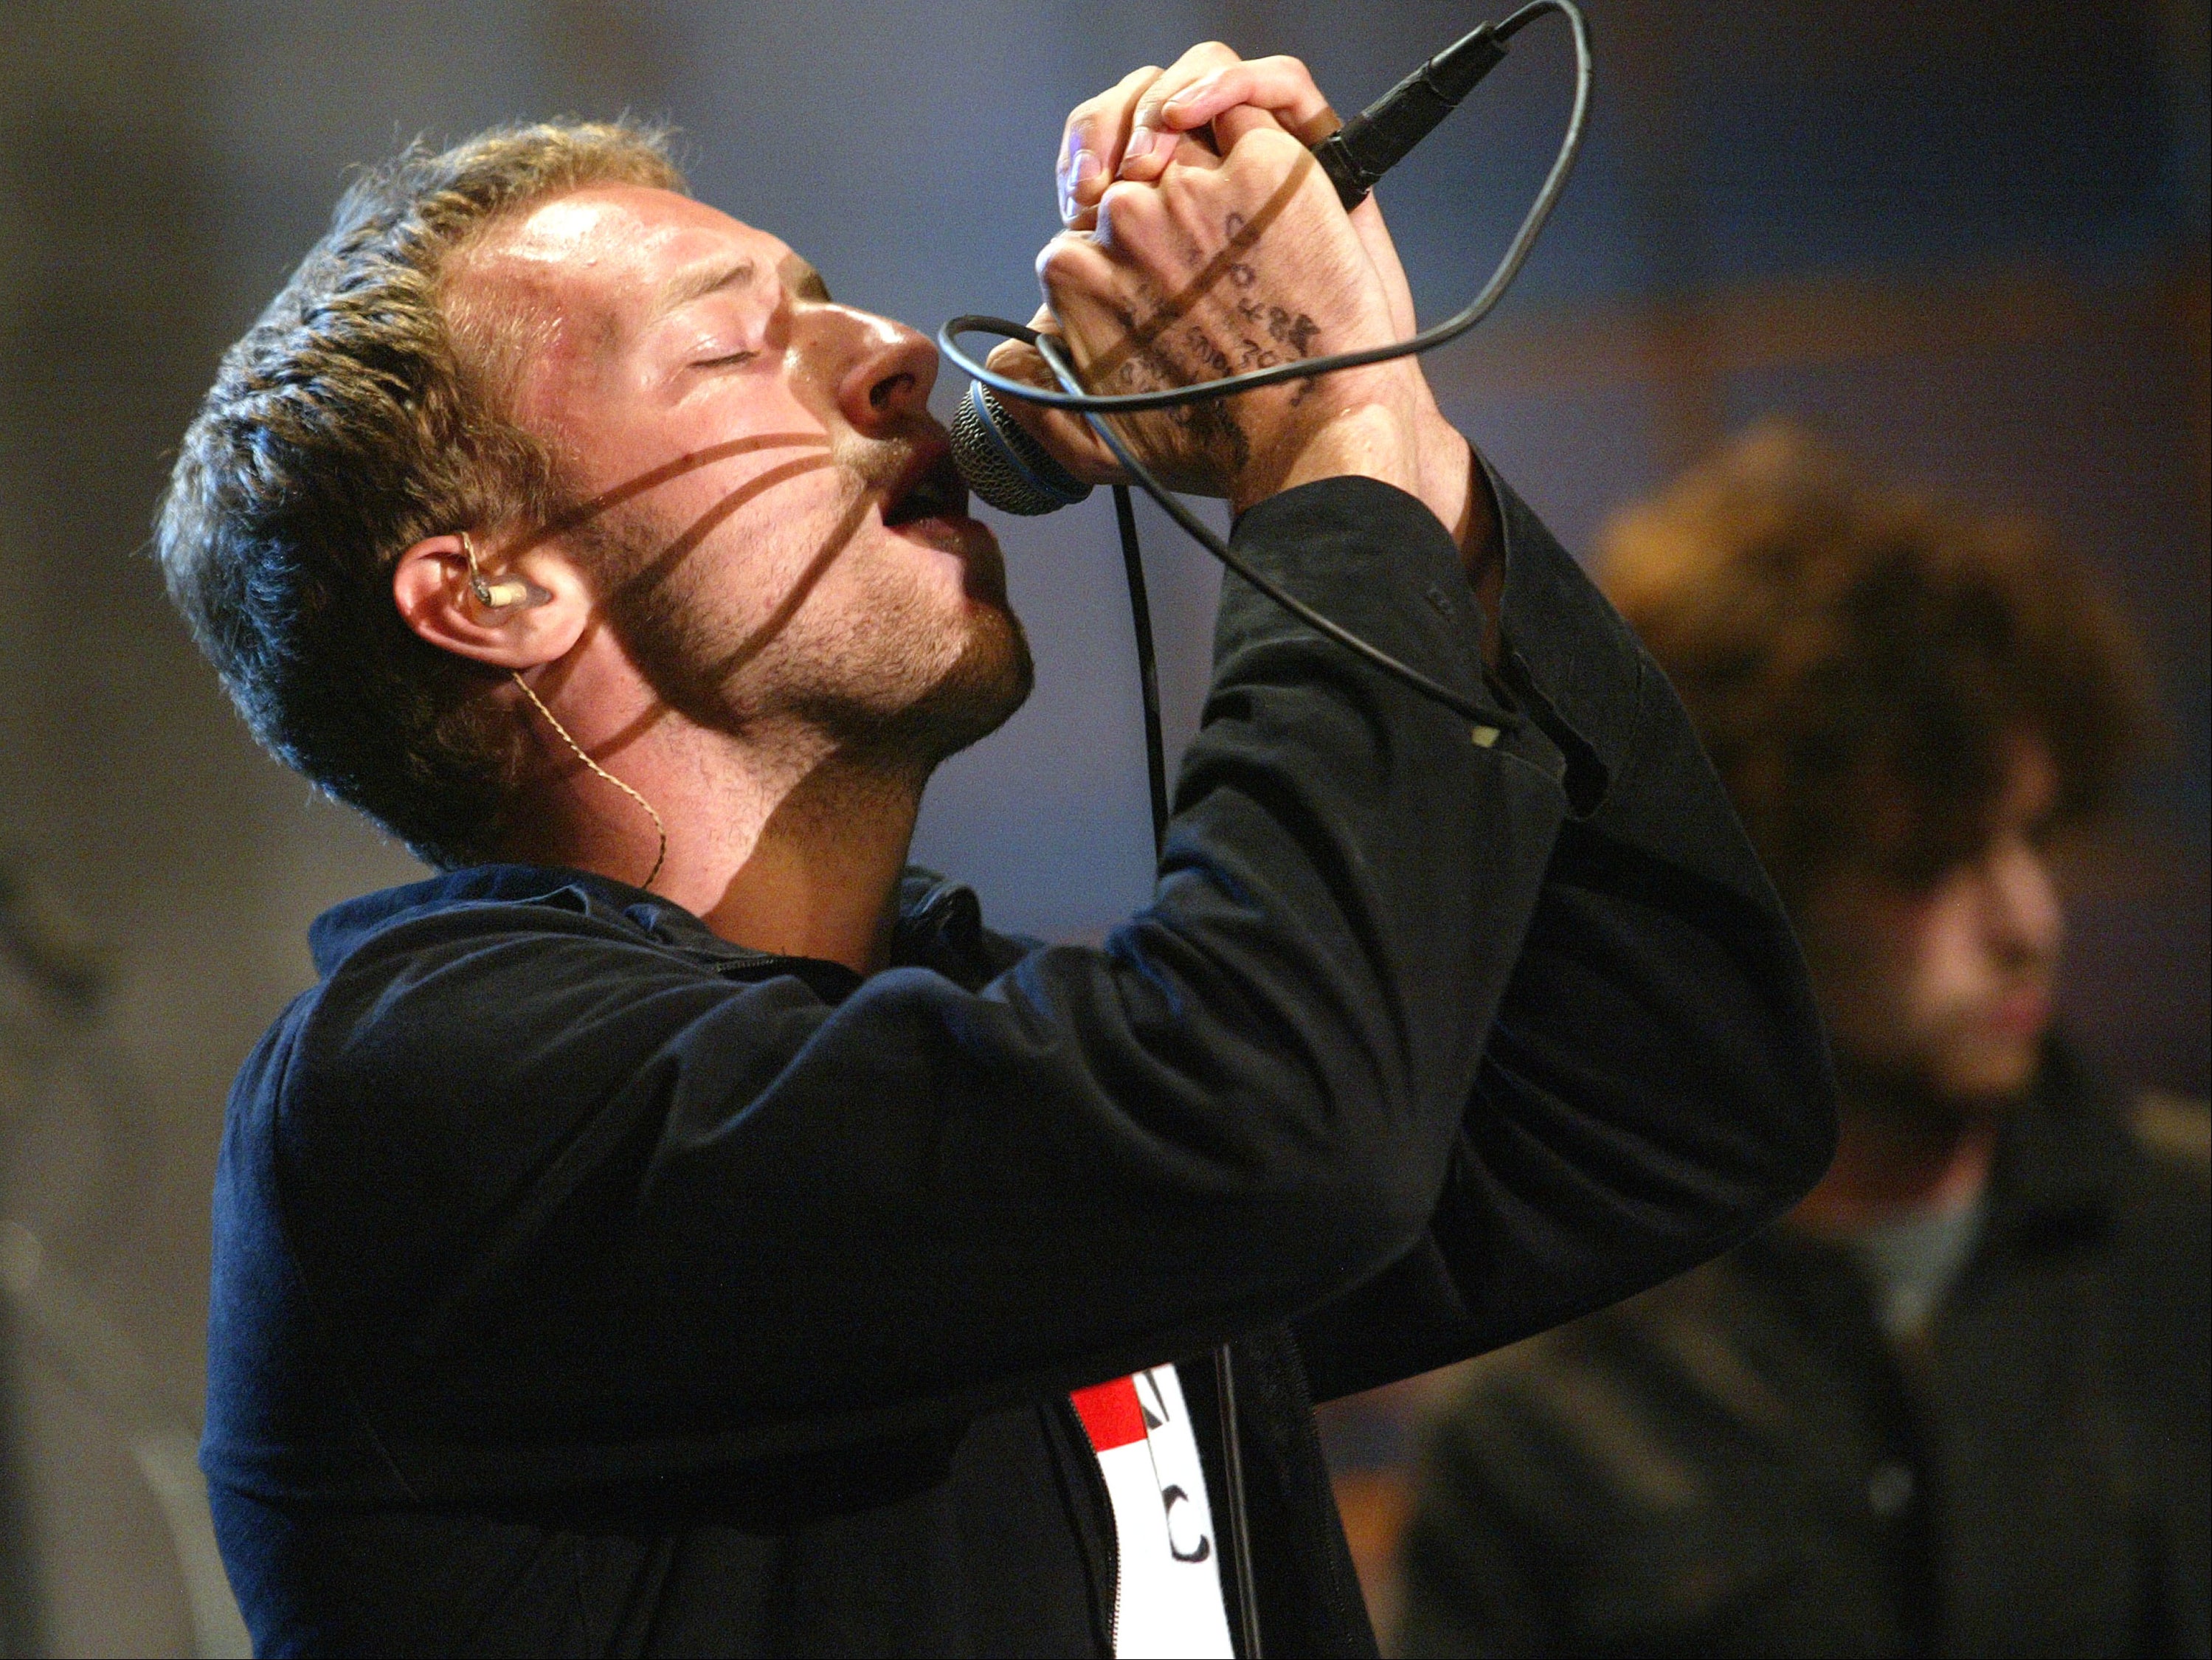 Coldplay singer Chris Martin in 2002